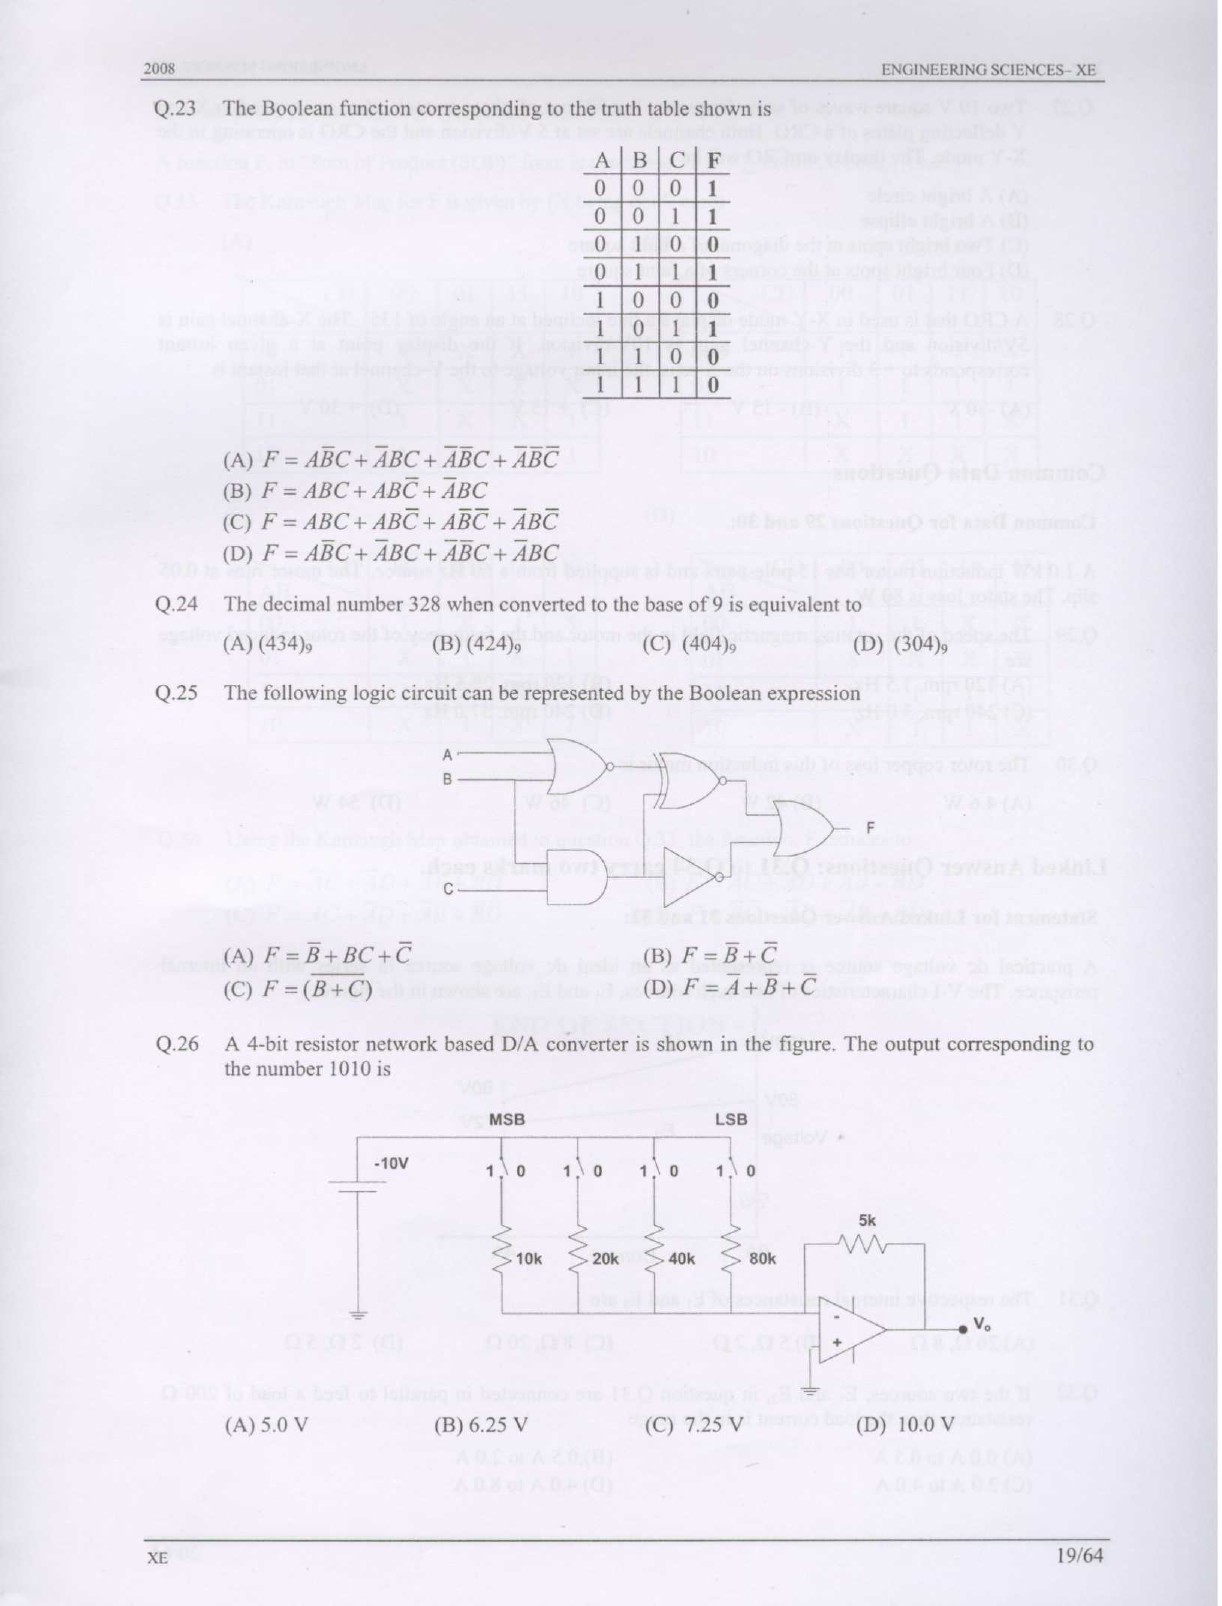 GATE Exam Question Paper 2008 Engineering Sciences 19